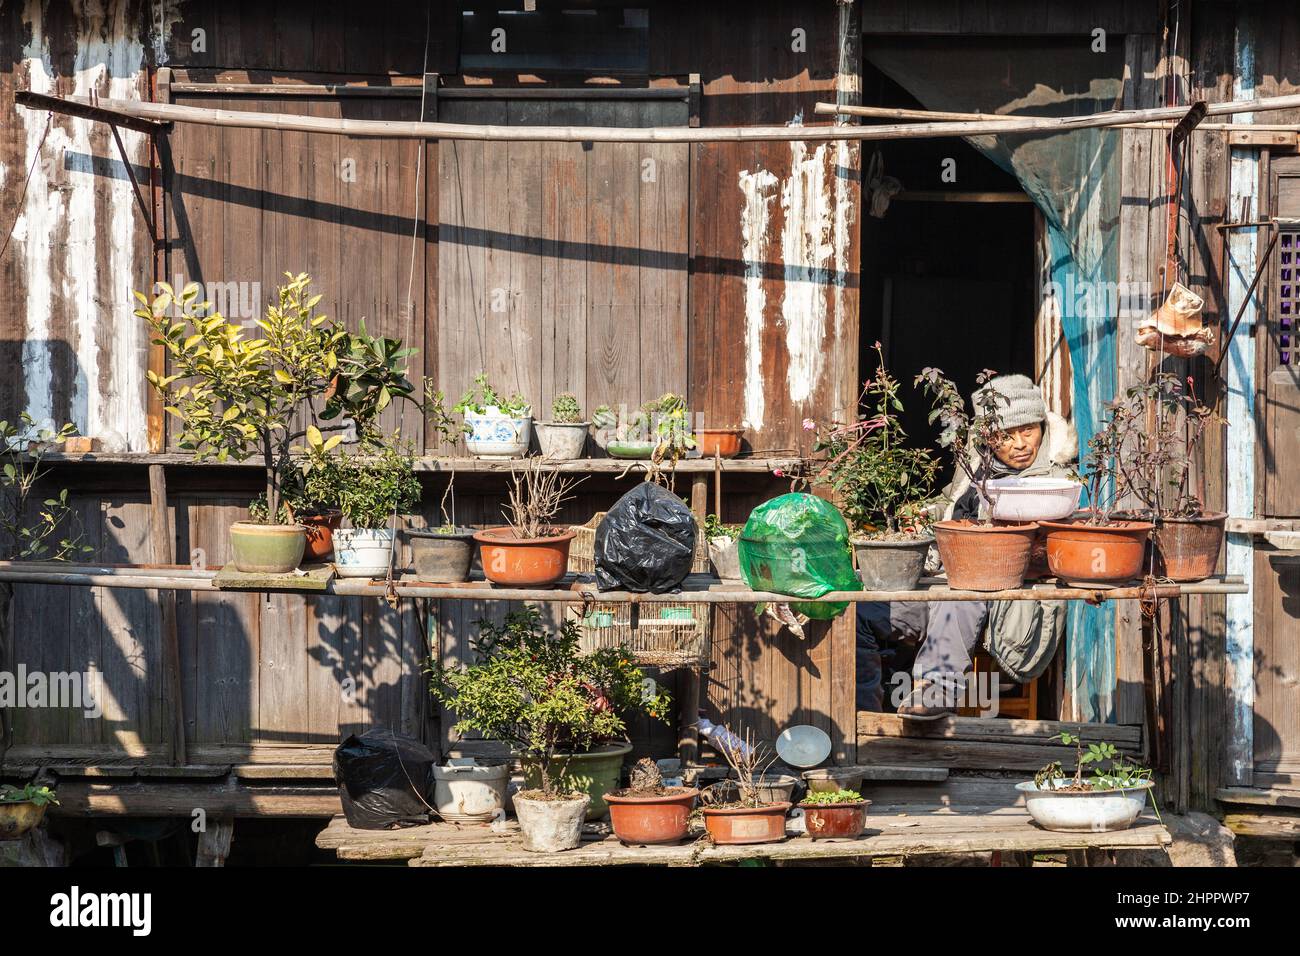 Man sitting on a balcony cluttered with various objects, trying to warm himself in the winter sun in the water village of Wenzhou, China Stock Photo